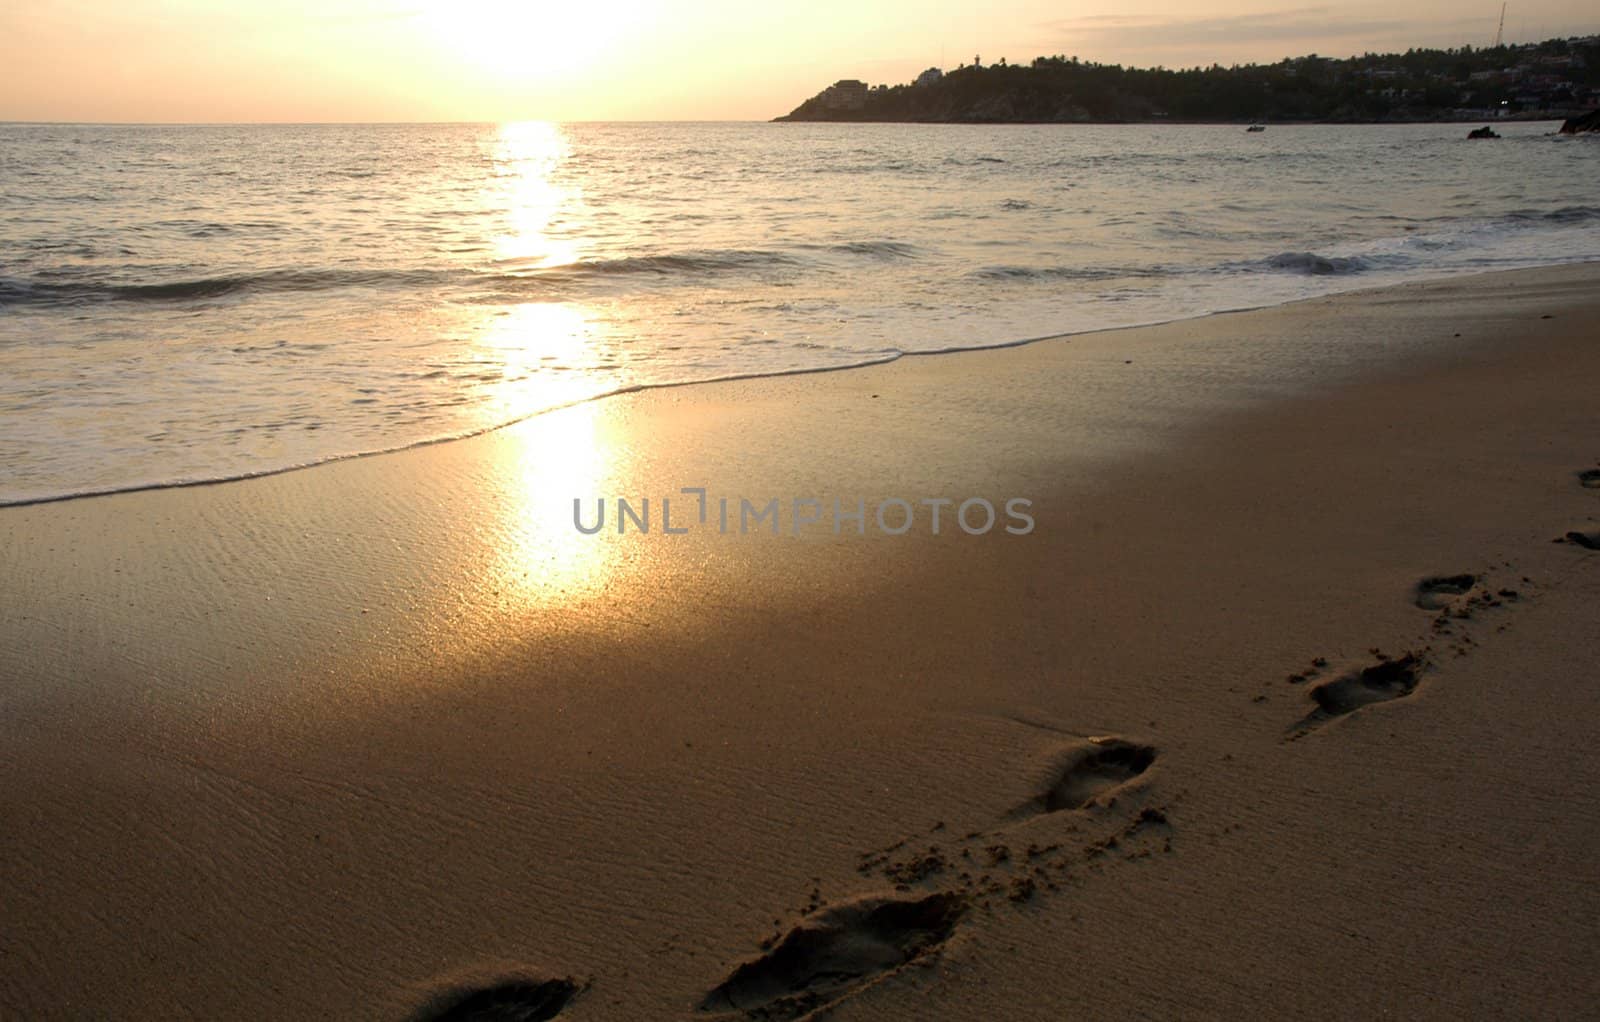 Footprints in sand on the beach during the sunset, Puerto Escondido, Mexico